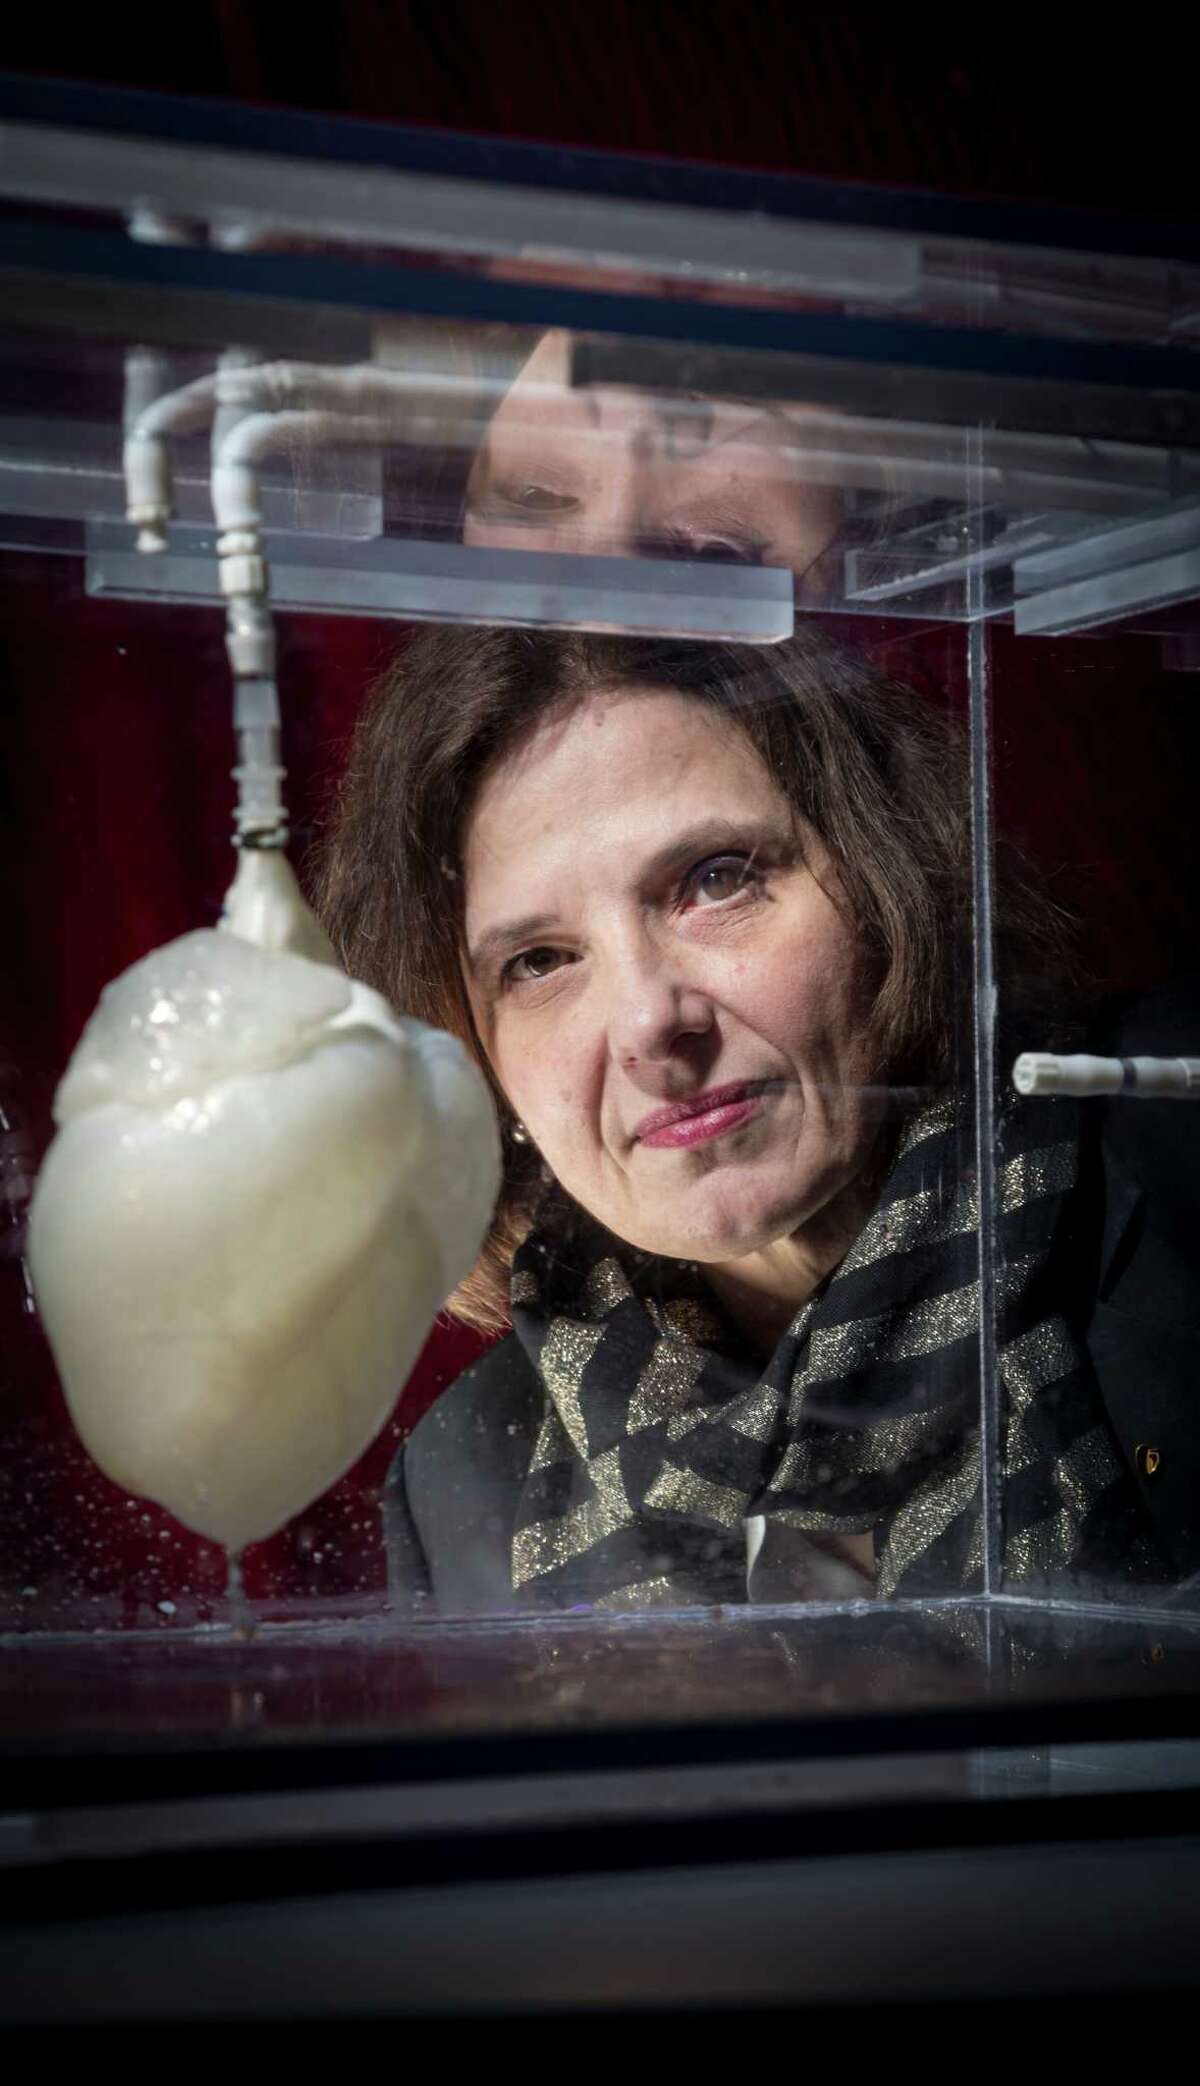 Dr. Doris Taylor, Director of Regenerative Medicine Research at Texas Heart Institute, looks at a heart scaffold which many believe is the first step toward being able to grow new replacement hearts -- and other organs -- for people, Wednesday, Jan. 16, 2013, in Houston. Dr. Taylor her team garnered international recognition for her work involving "whole organ decellularization," in which they showed they can remove the existing cells from hearts of laboratory animals and even humans to leave a framework for building new organs. By then repopulating the framework with another human adult stem cells and giving it a blood supply, the heart regenerates, taking on the characteristics and functions of a revitalized beating heart. ( Michael Paulsen / Houston Chronicle )